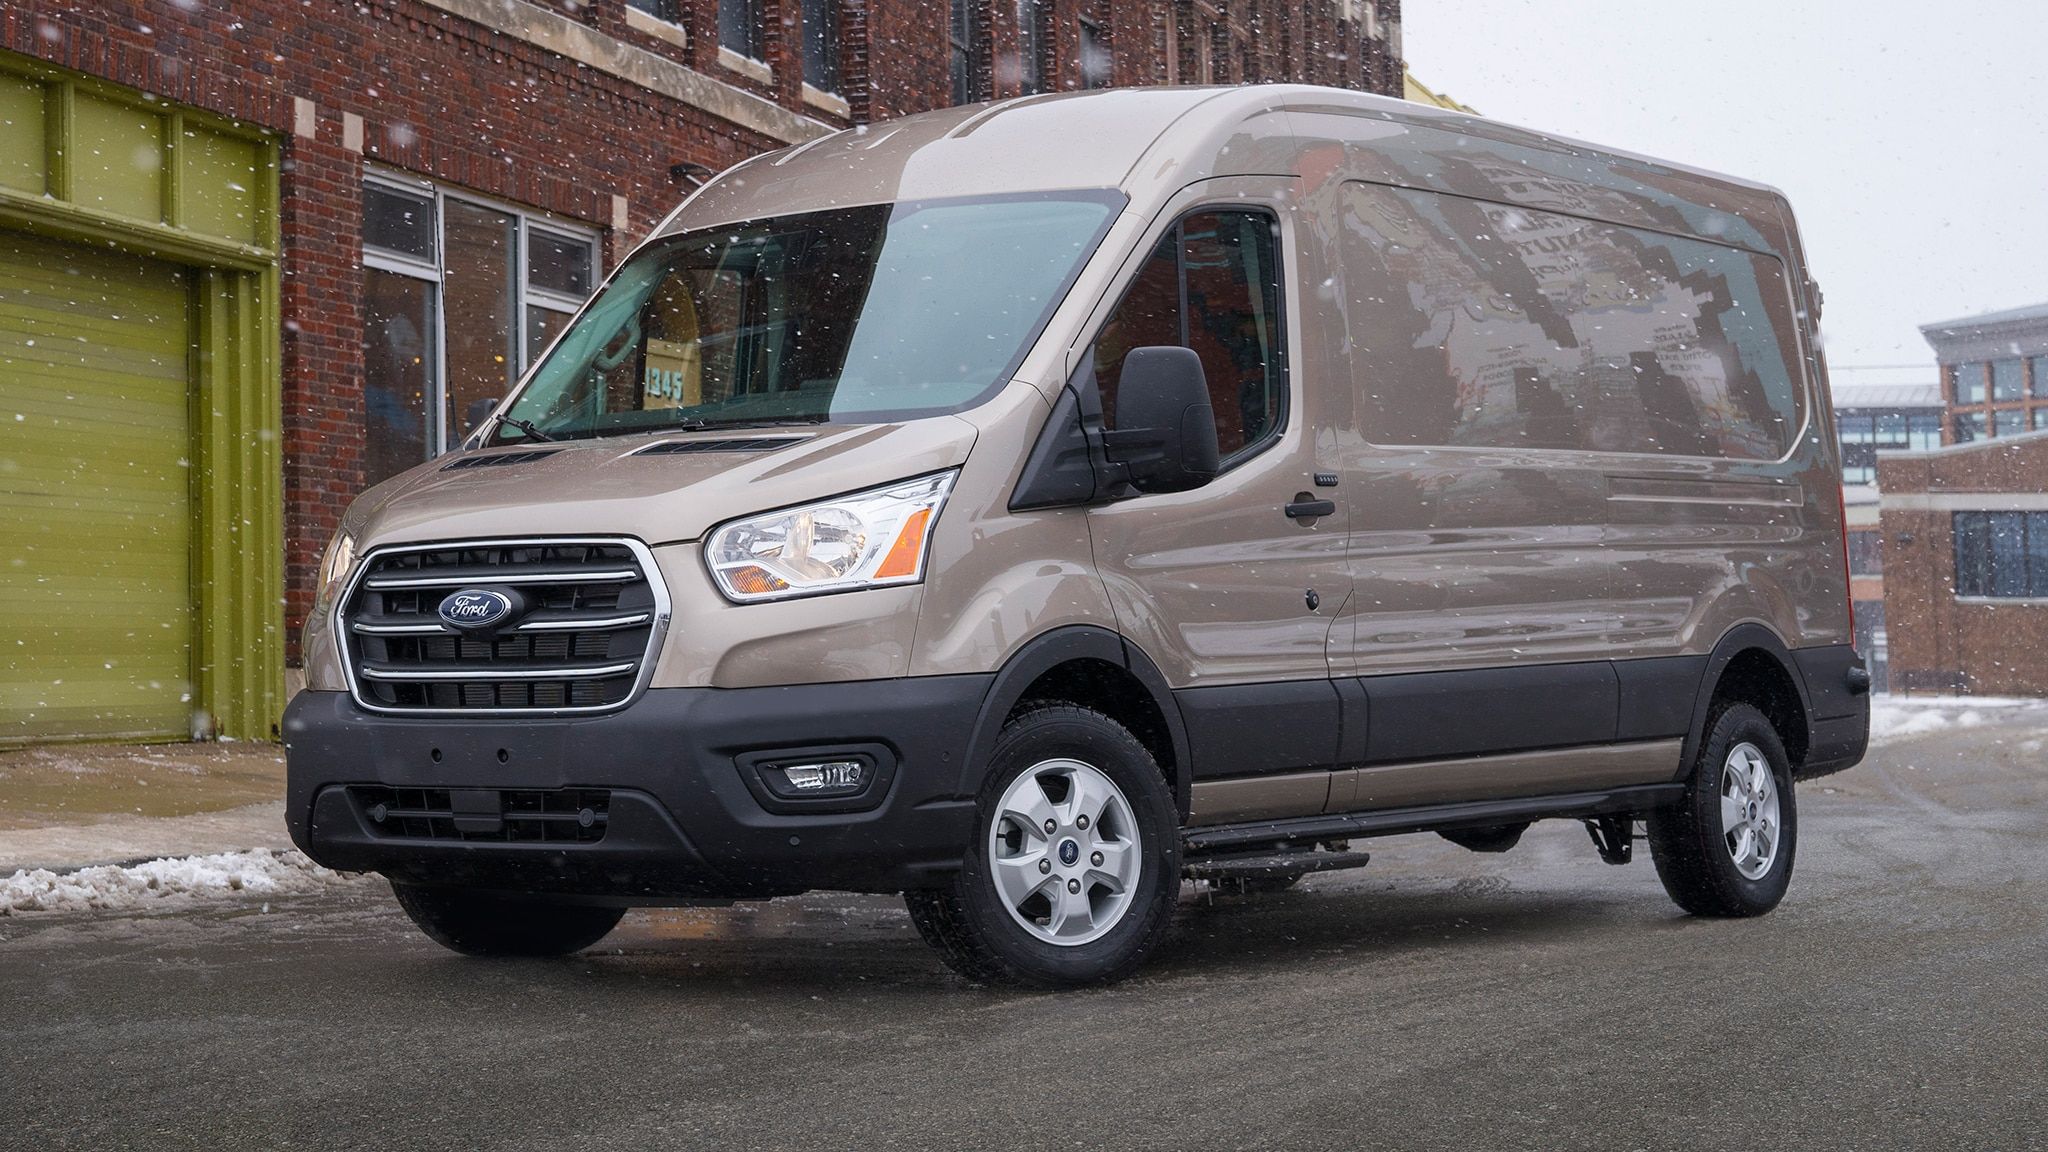 Ford Transit Cargo Van Review: Price, MPG, Rivals, Cargo, And Towing Capacity